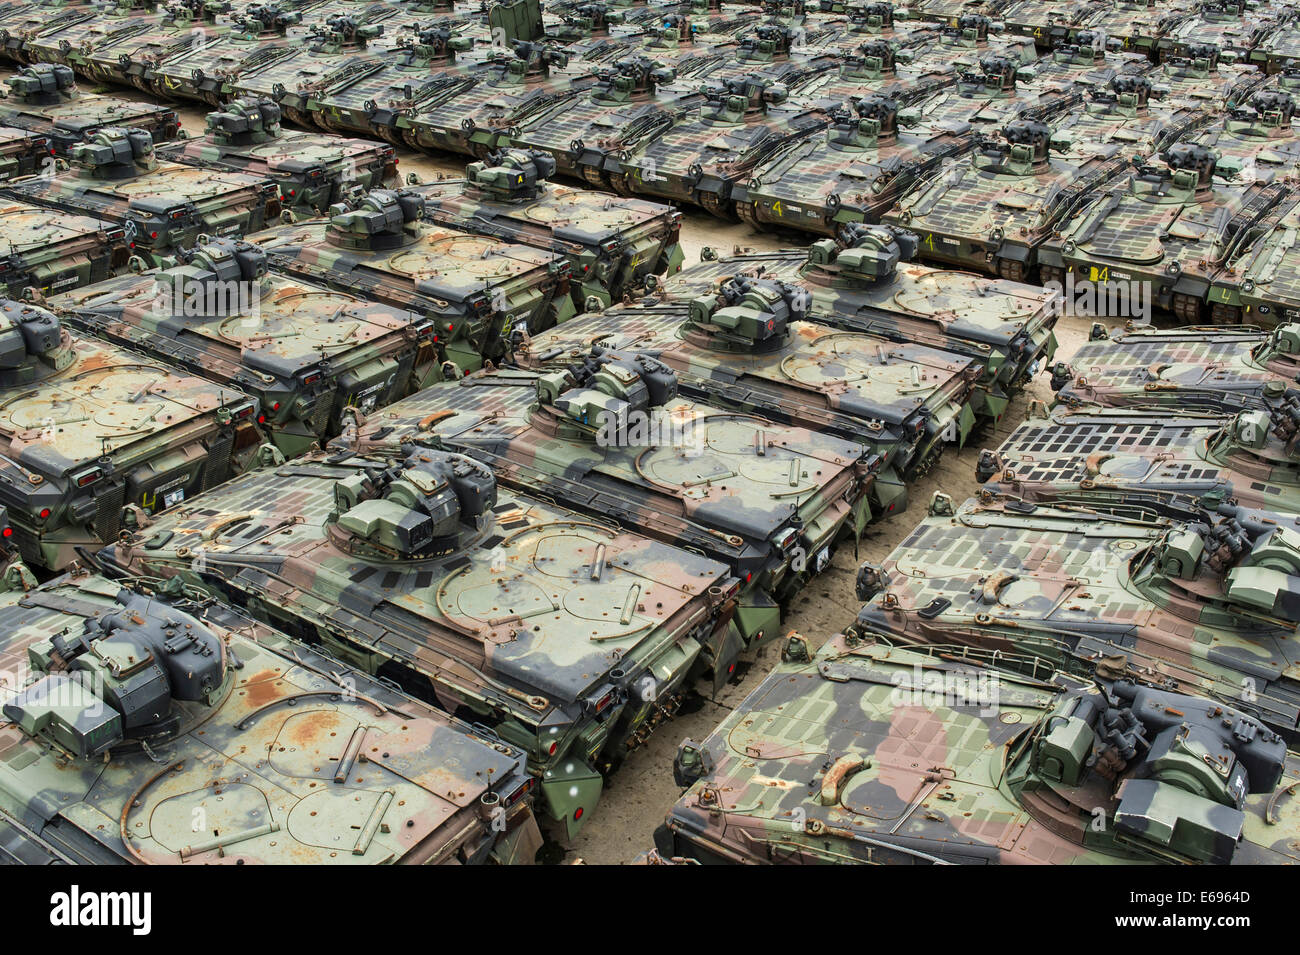 Armored vehicles type Marder awaiting scrapping, Rockensußra, Thuringia, Germany Stock Photo